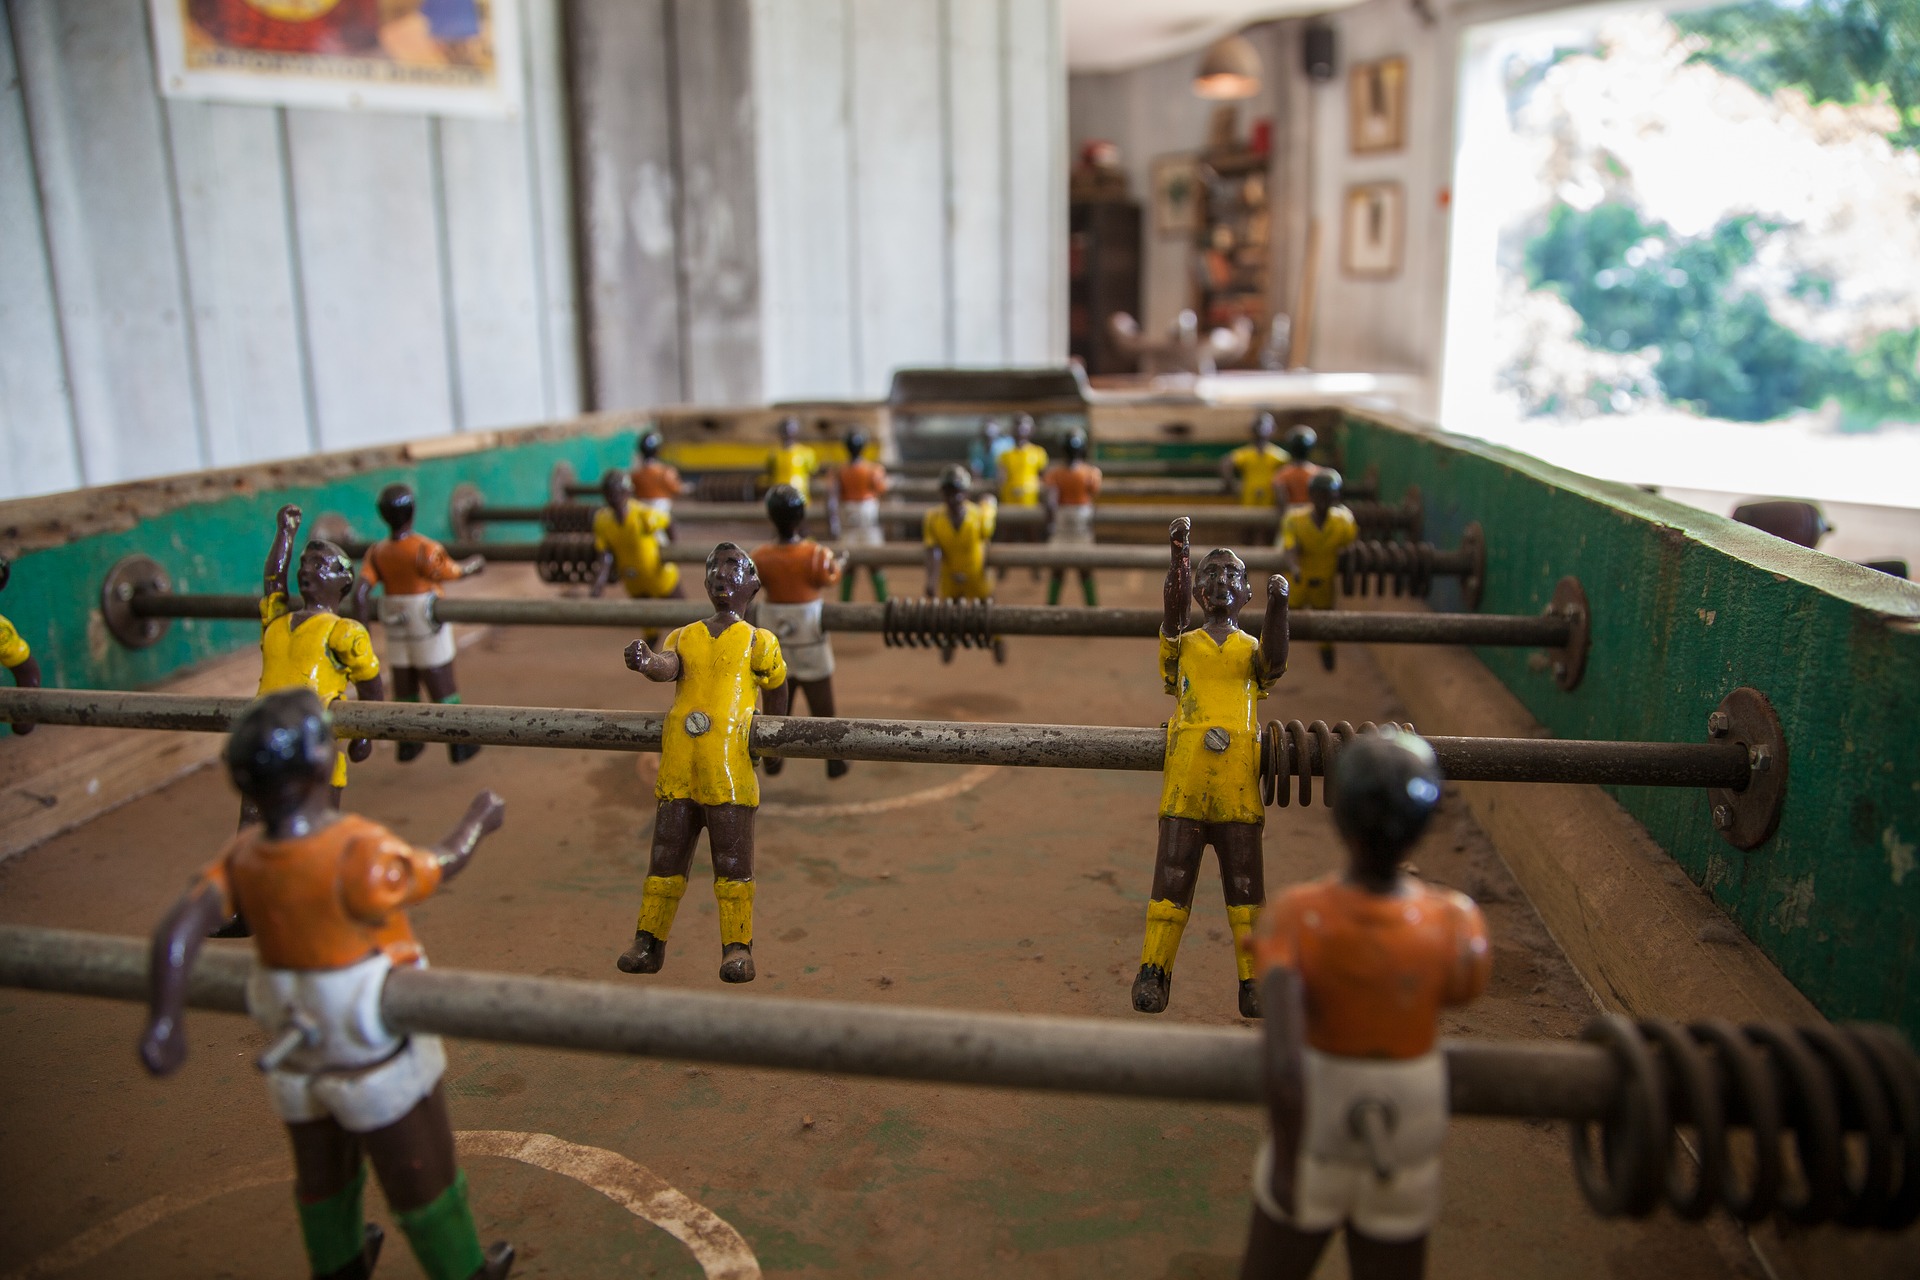 a real life foosball table showing the characters, the field you play on, the rods that players move to interact.